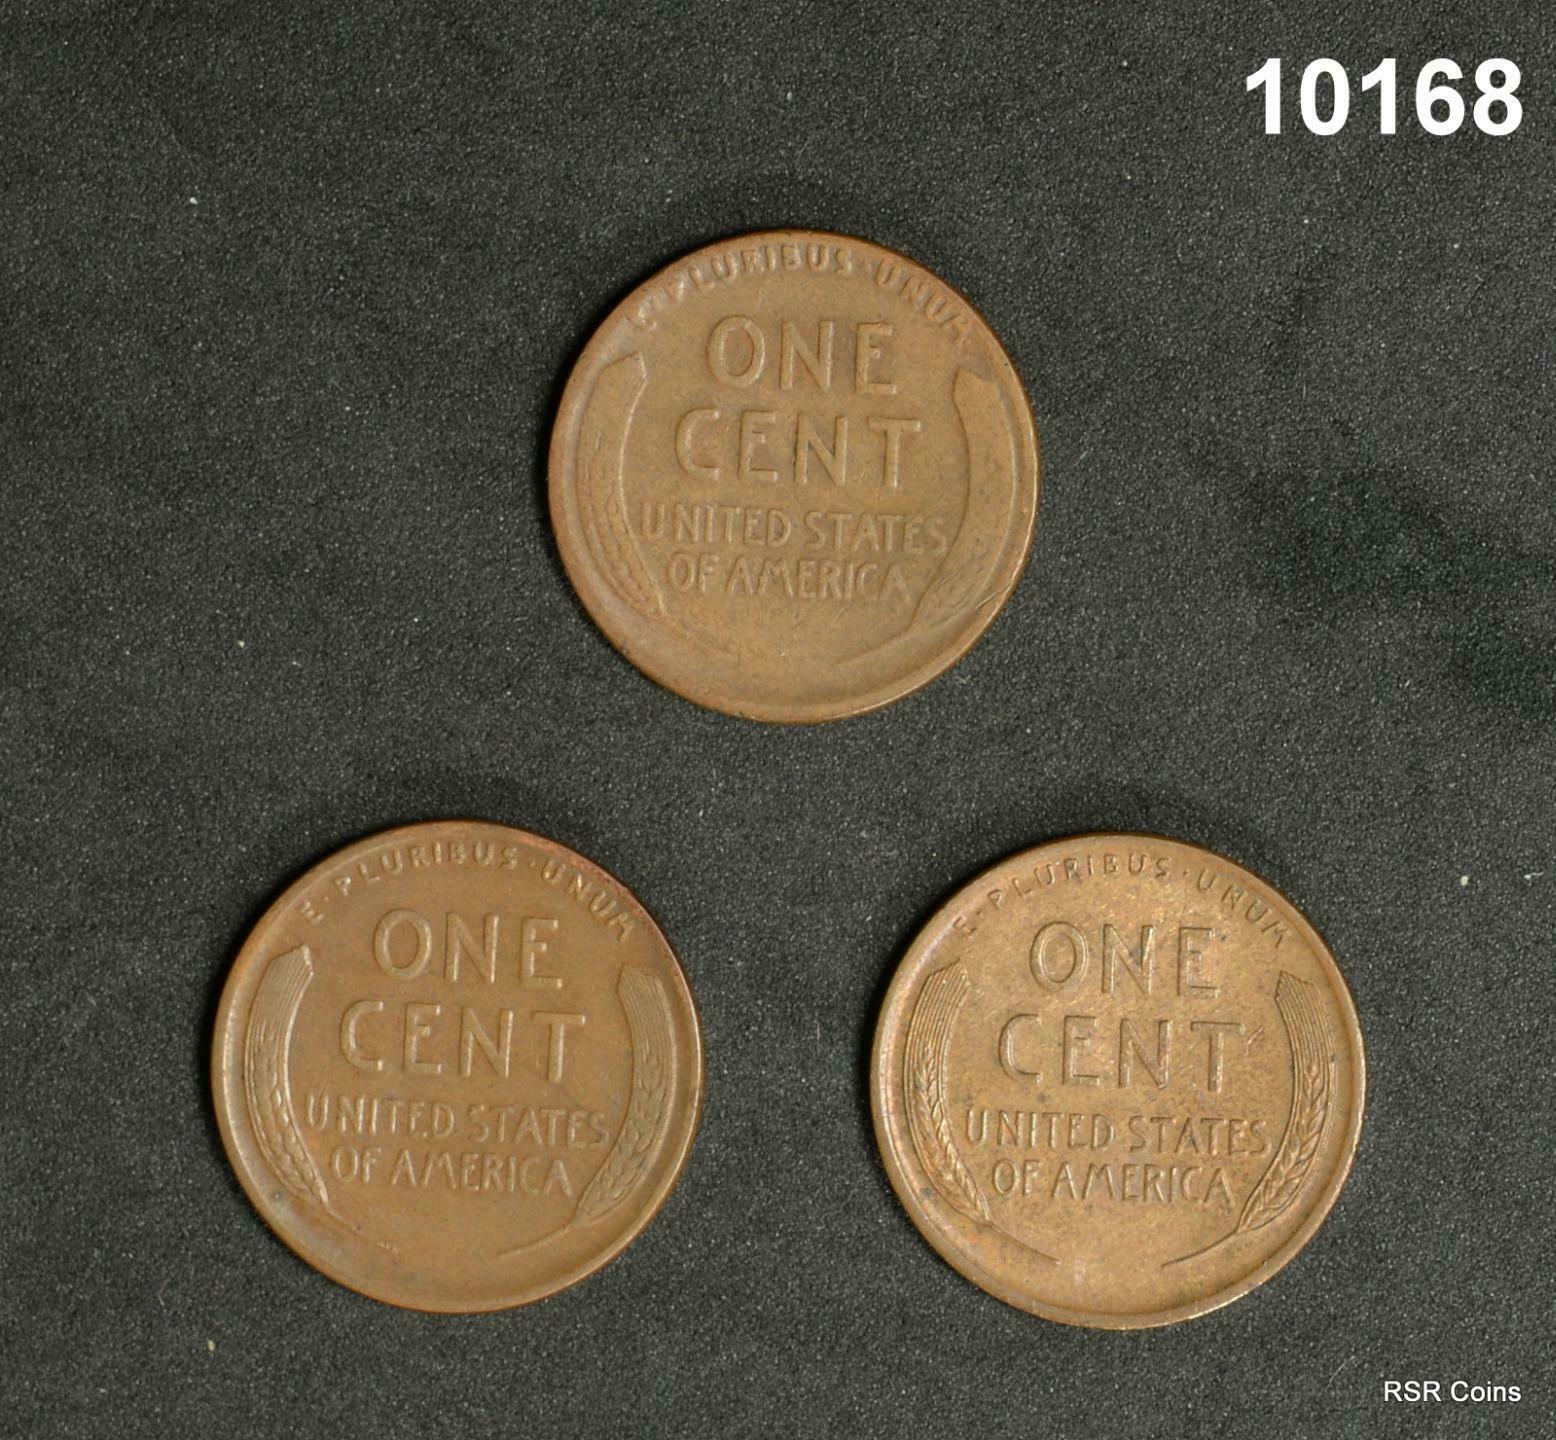 1925 UNC., 1925D FINE, 1925S XF, 3 COIN LINCOLN CENT LOT #10168